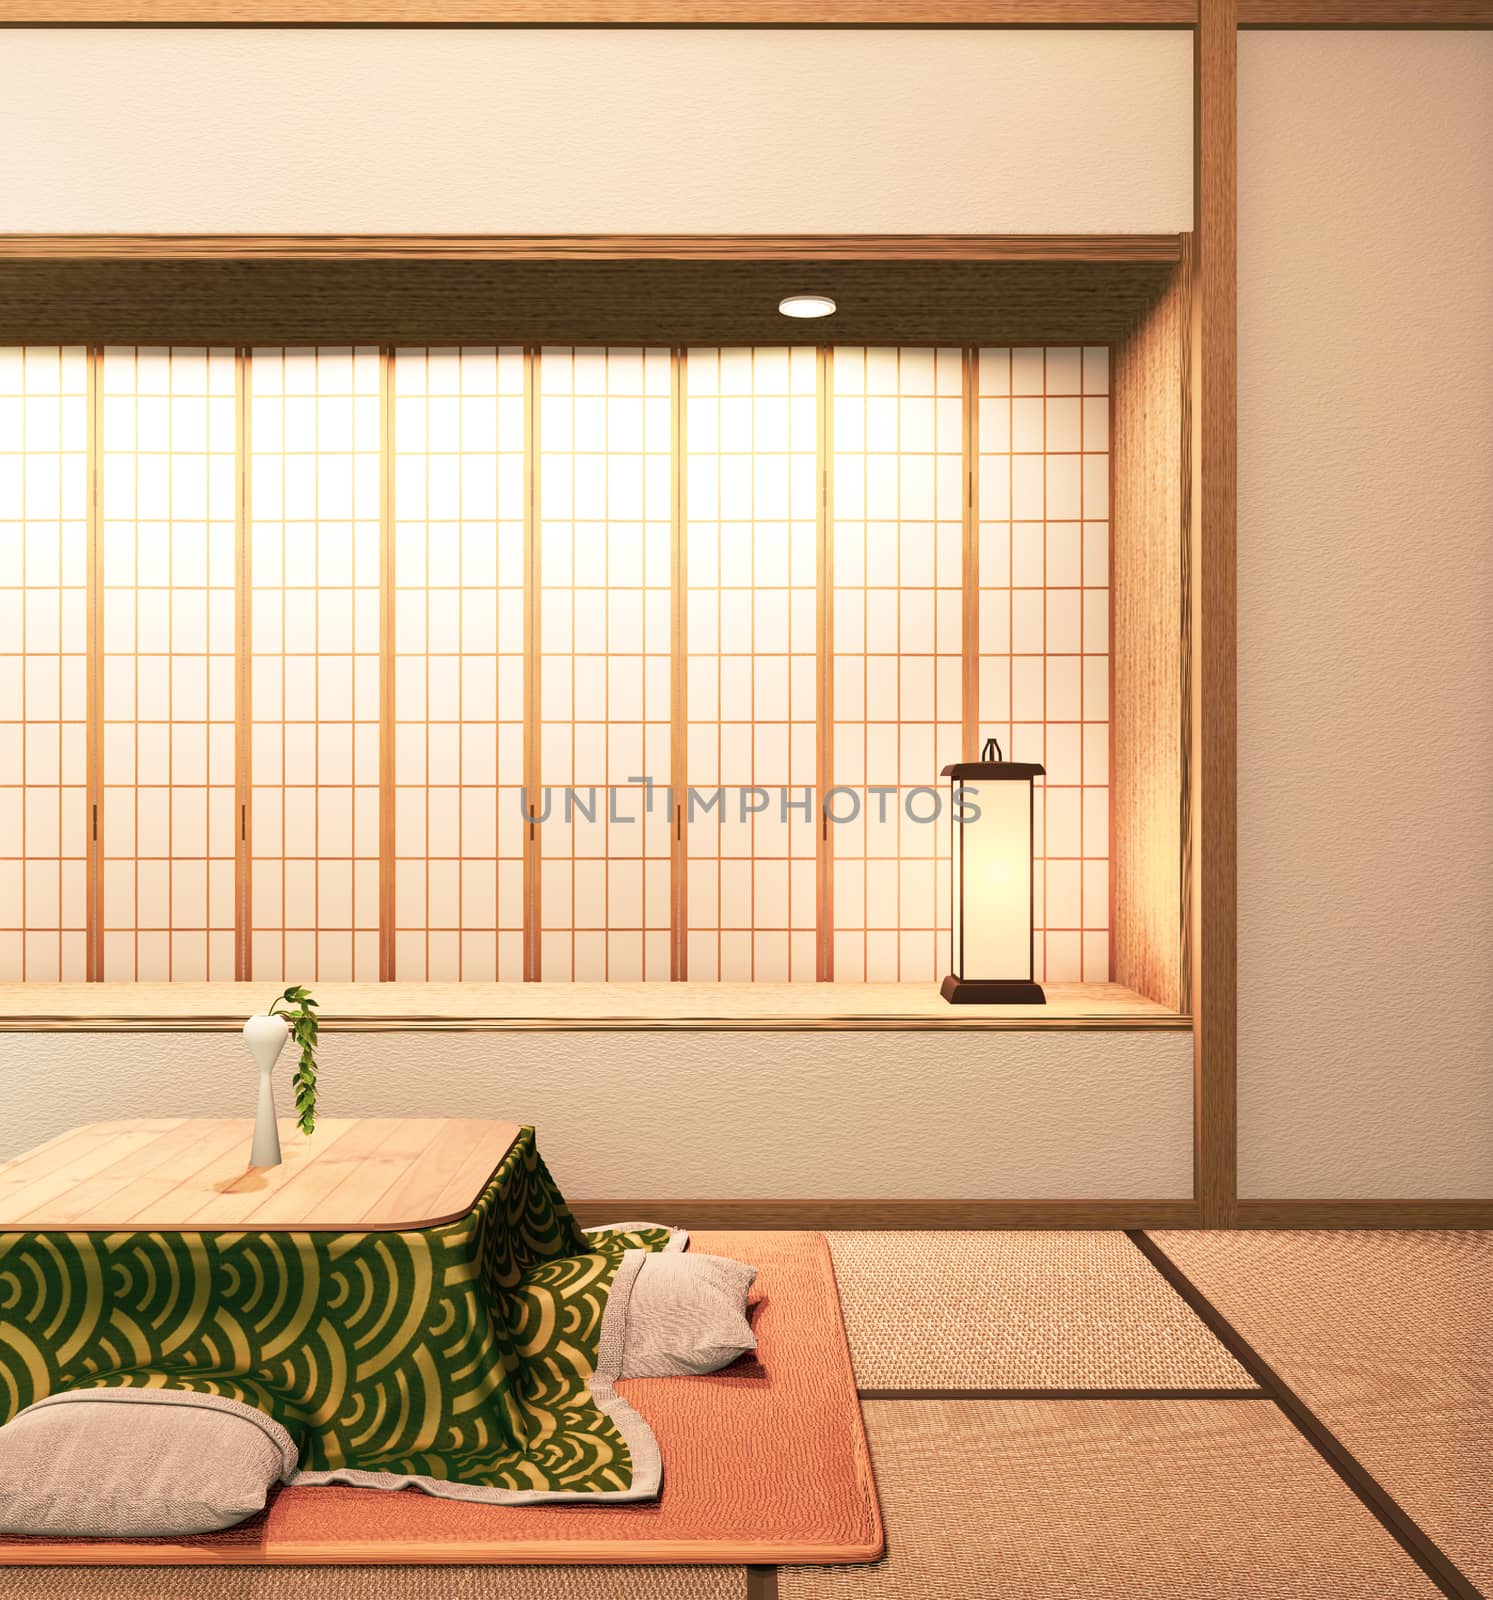 kotatsu low table and pillow on tatami mat, room japan.3D redner by Minny0012011@hotmail.com